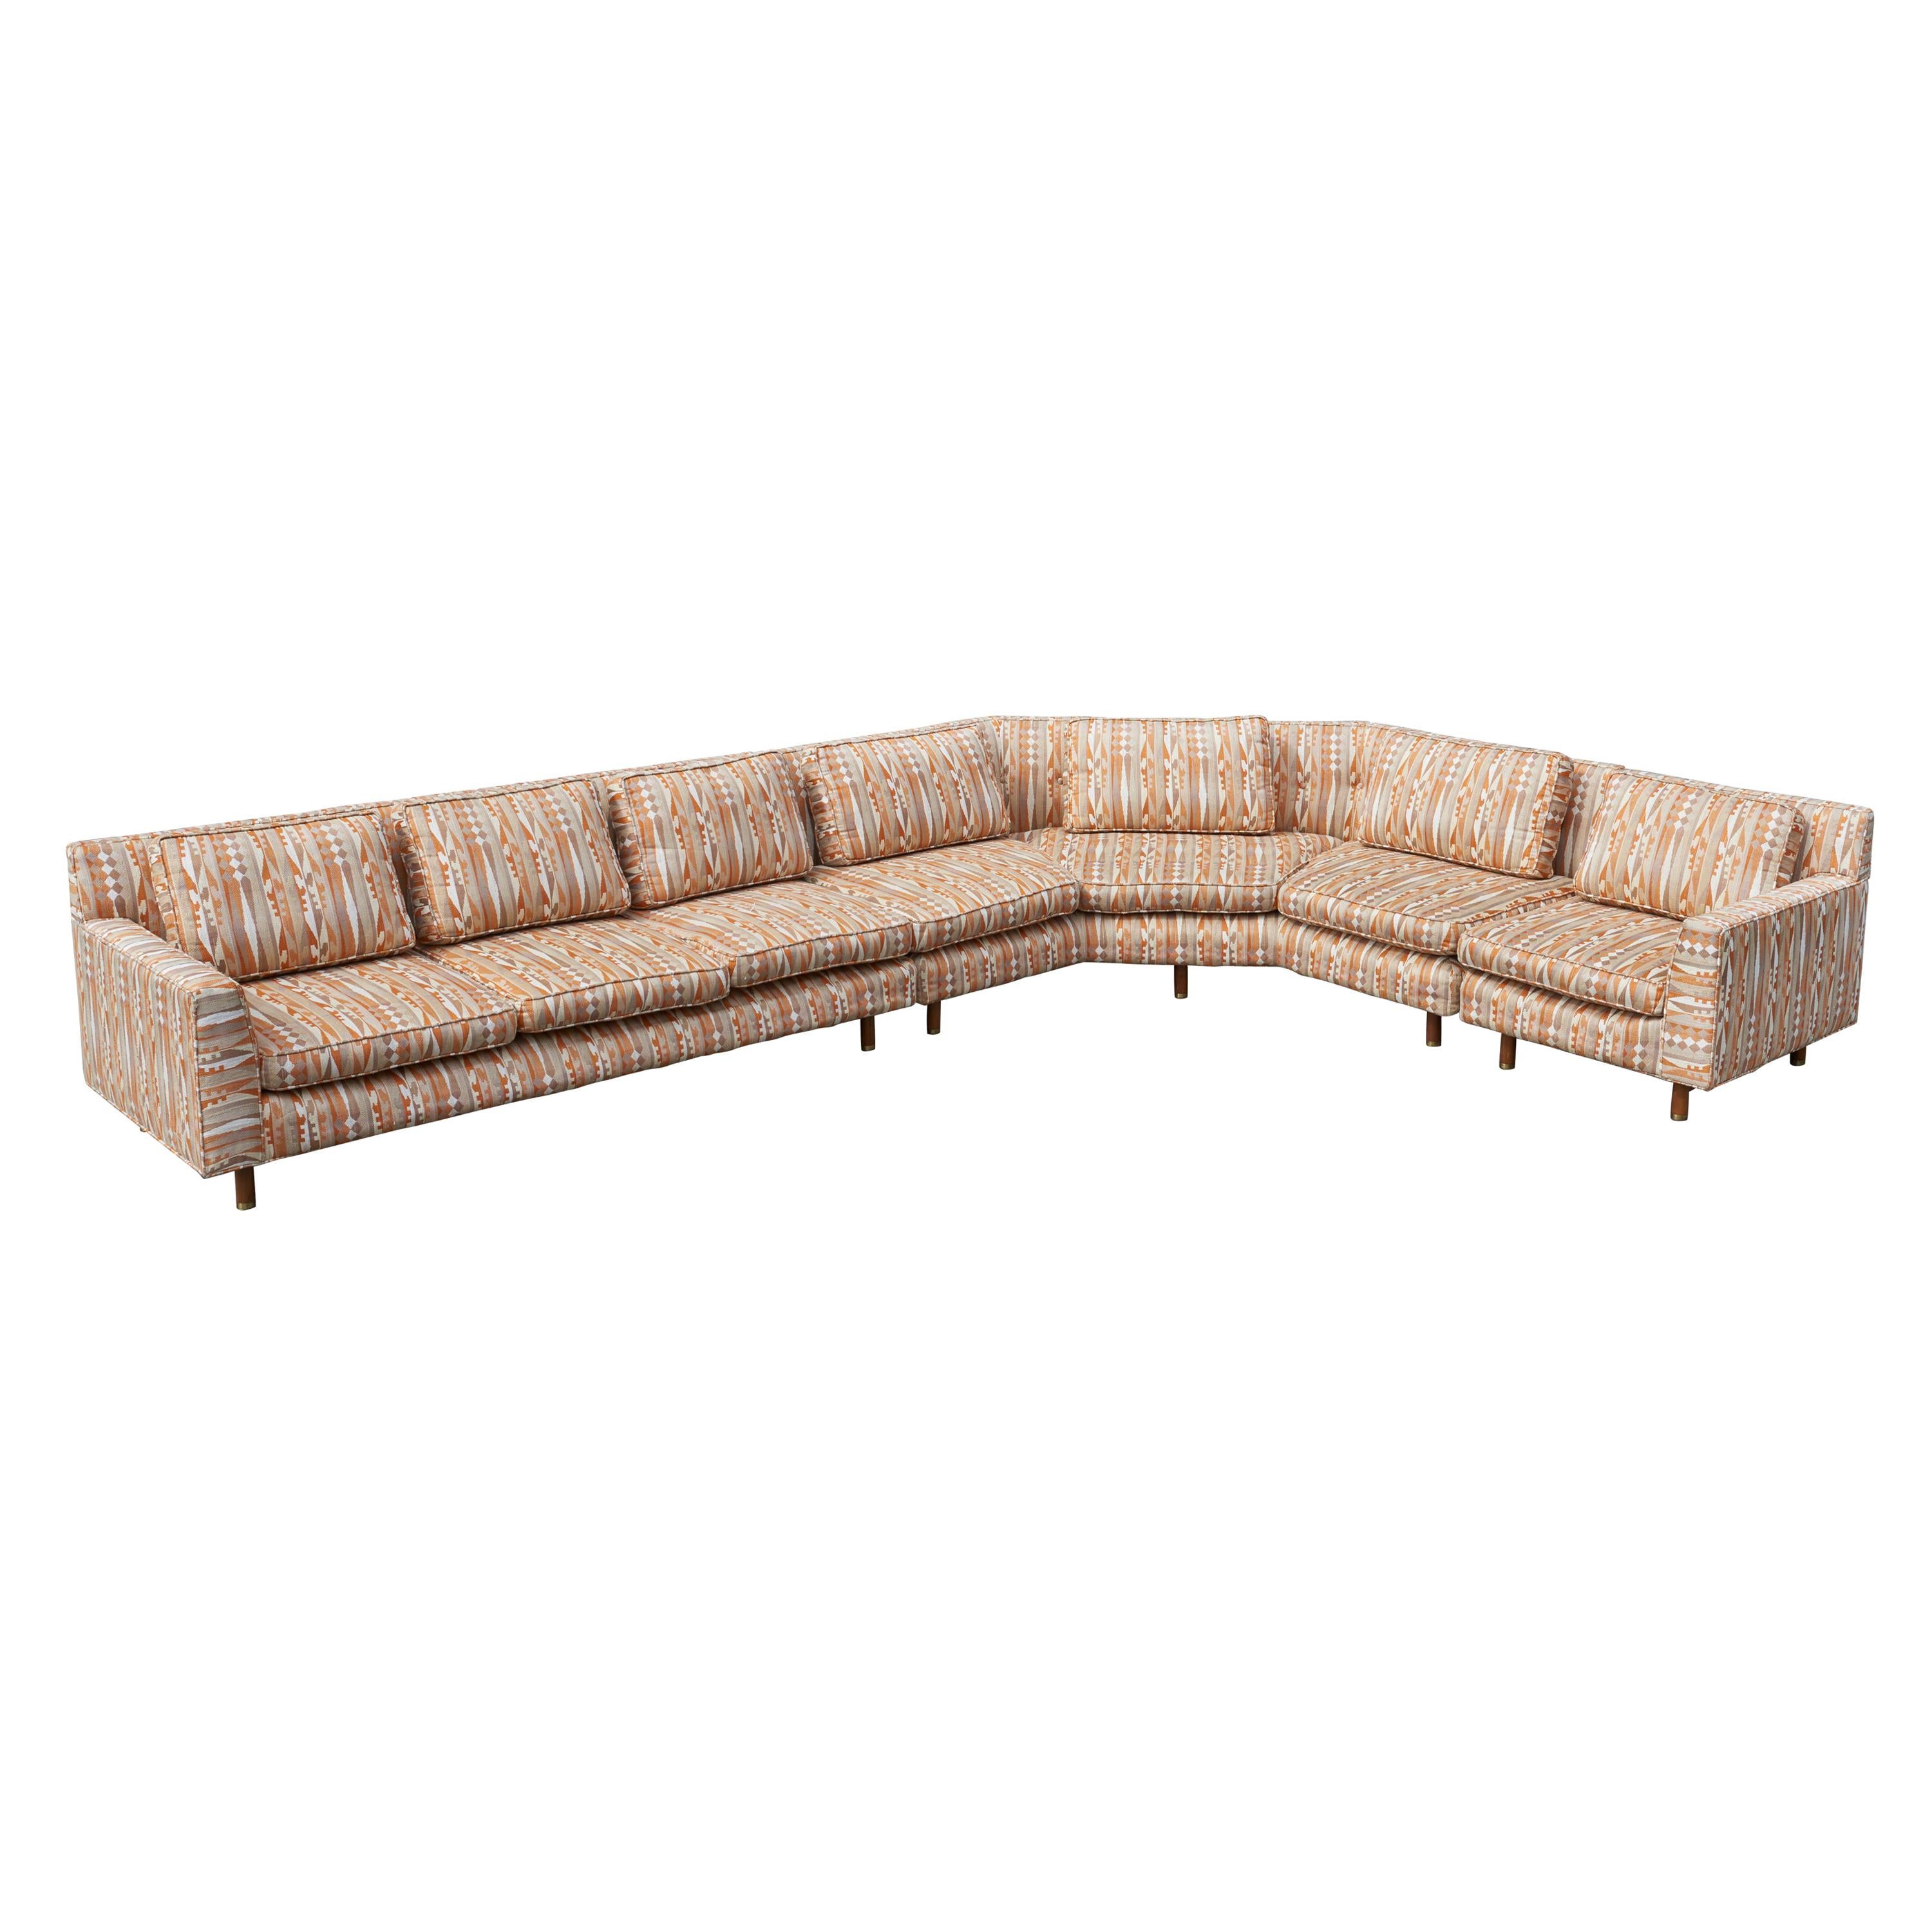 Huge Sectional Sofa by Edward Wormley for Dunbar (Upholstery needed)